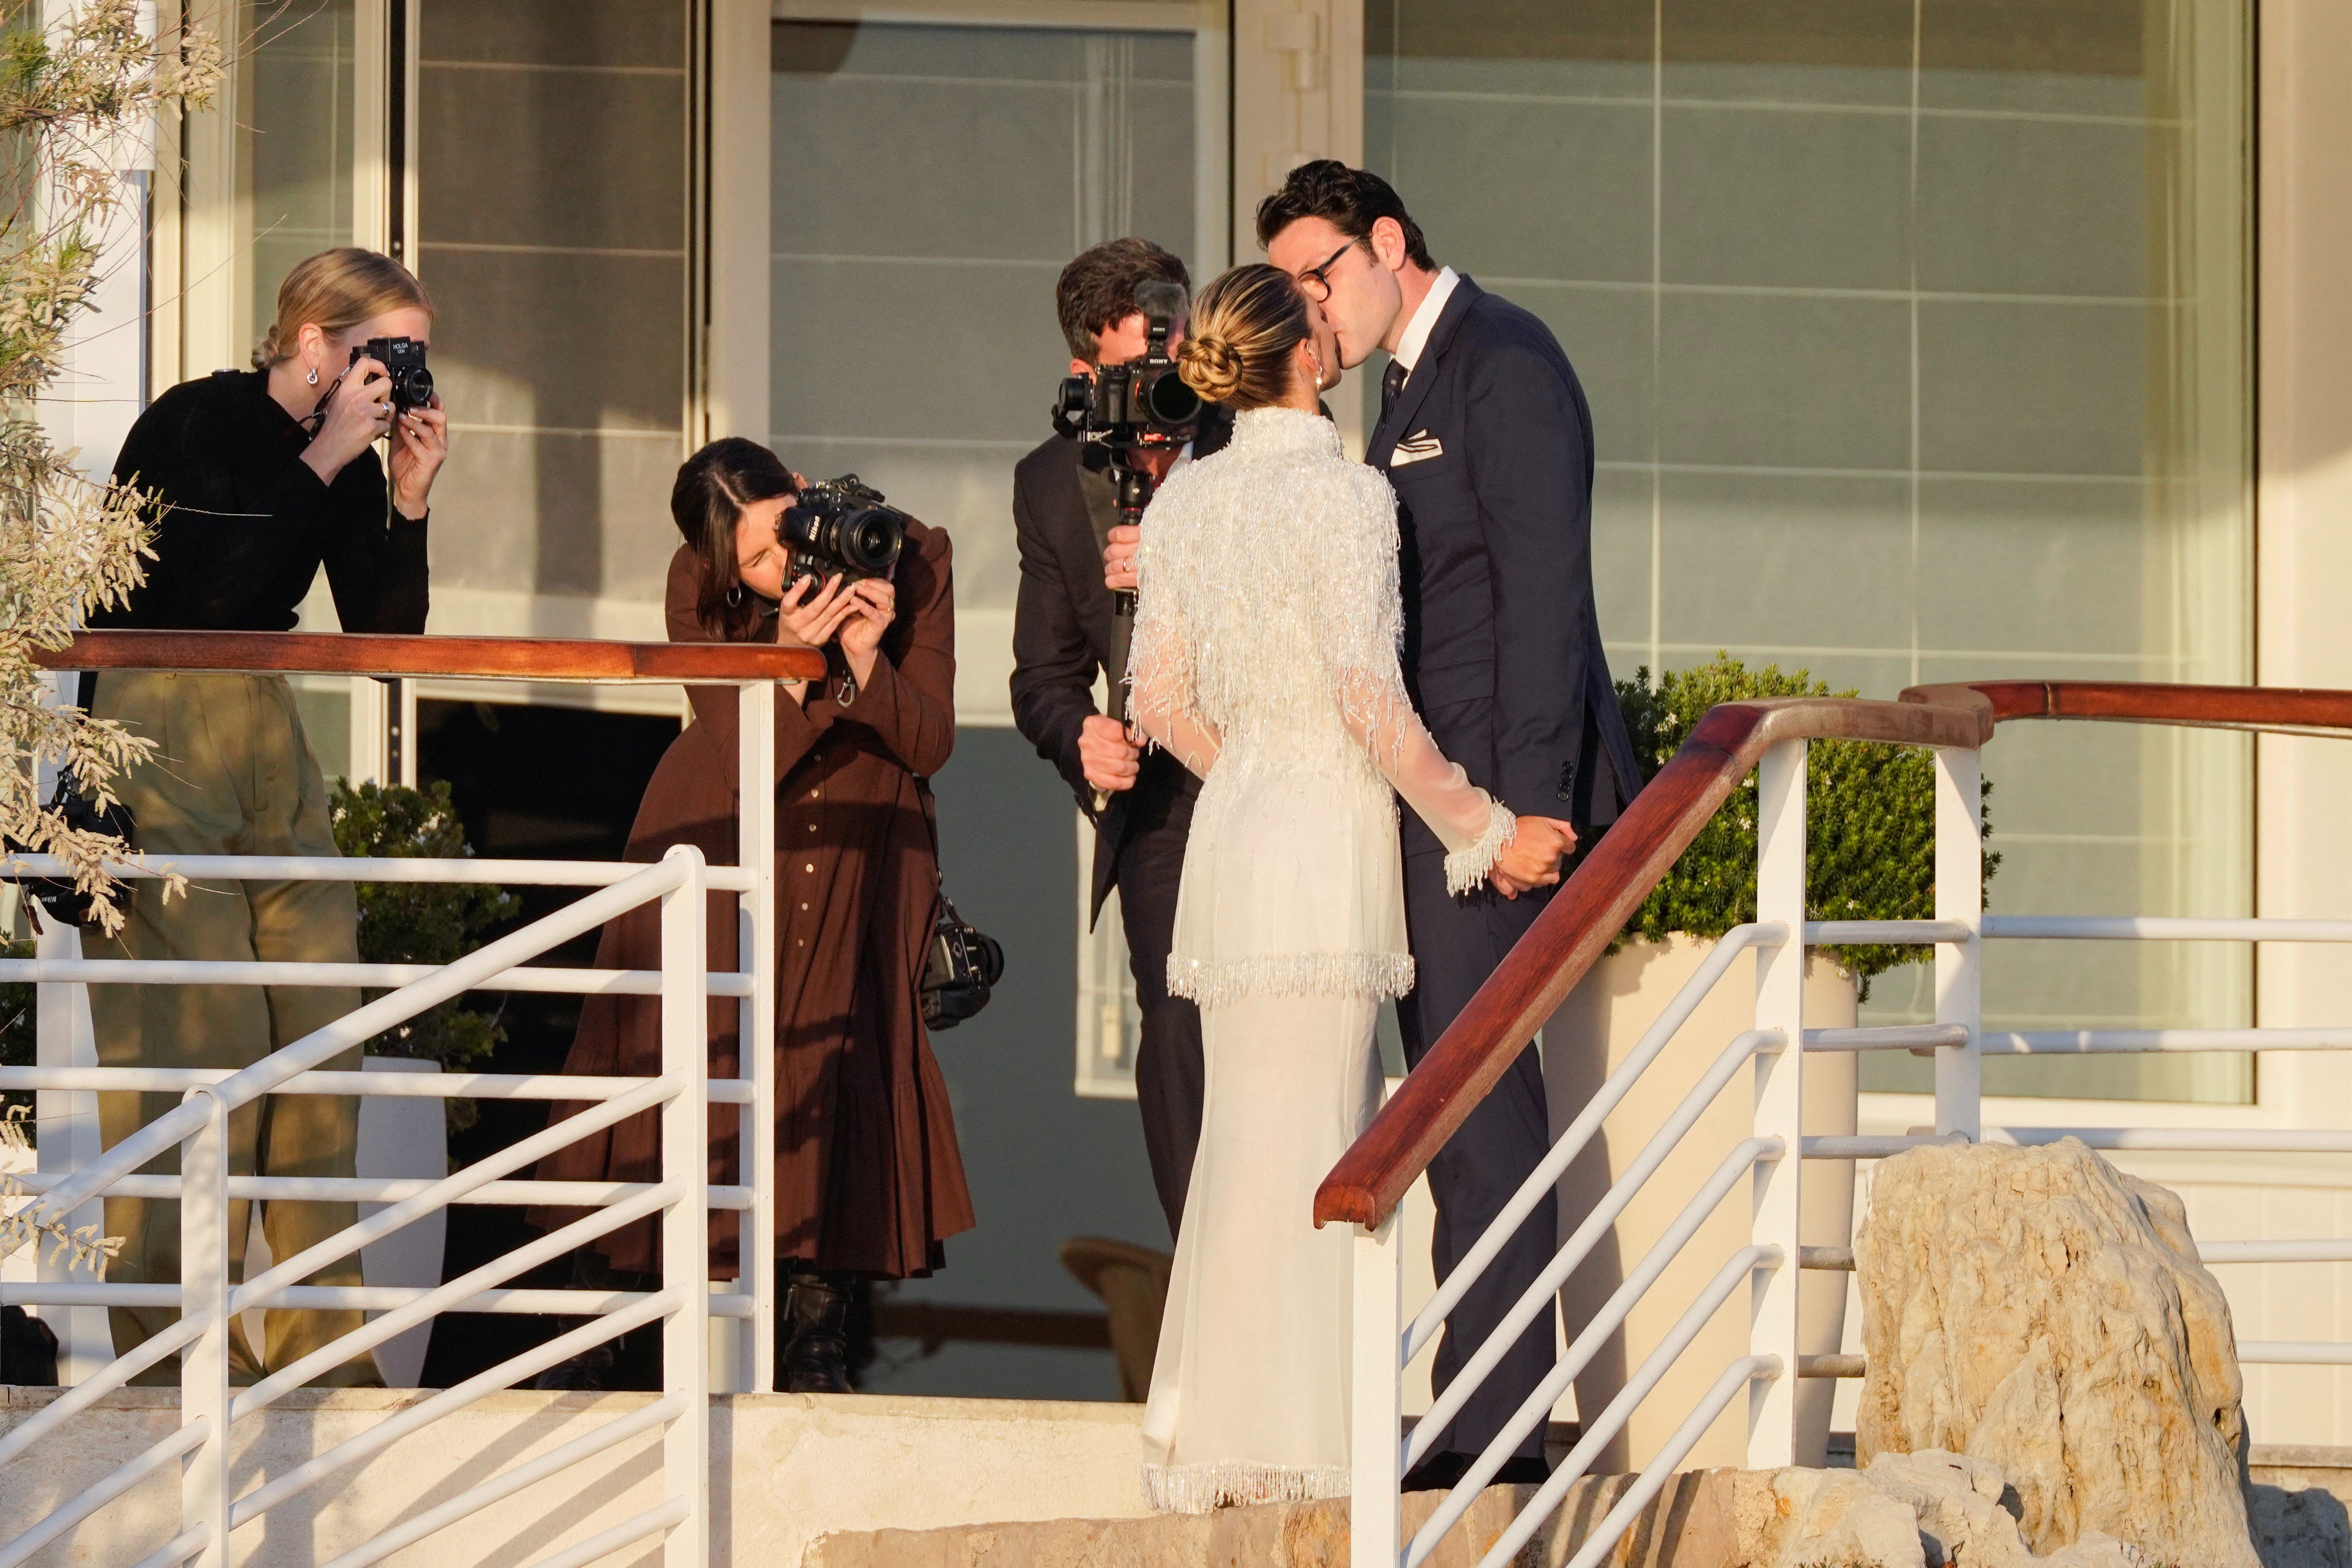 Sofia and Elliott married last year at Hotel du Cap-Eden-Roc in Antibes, France